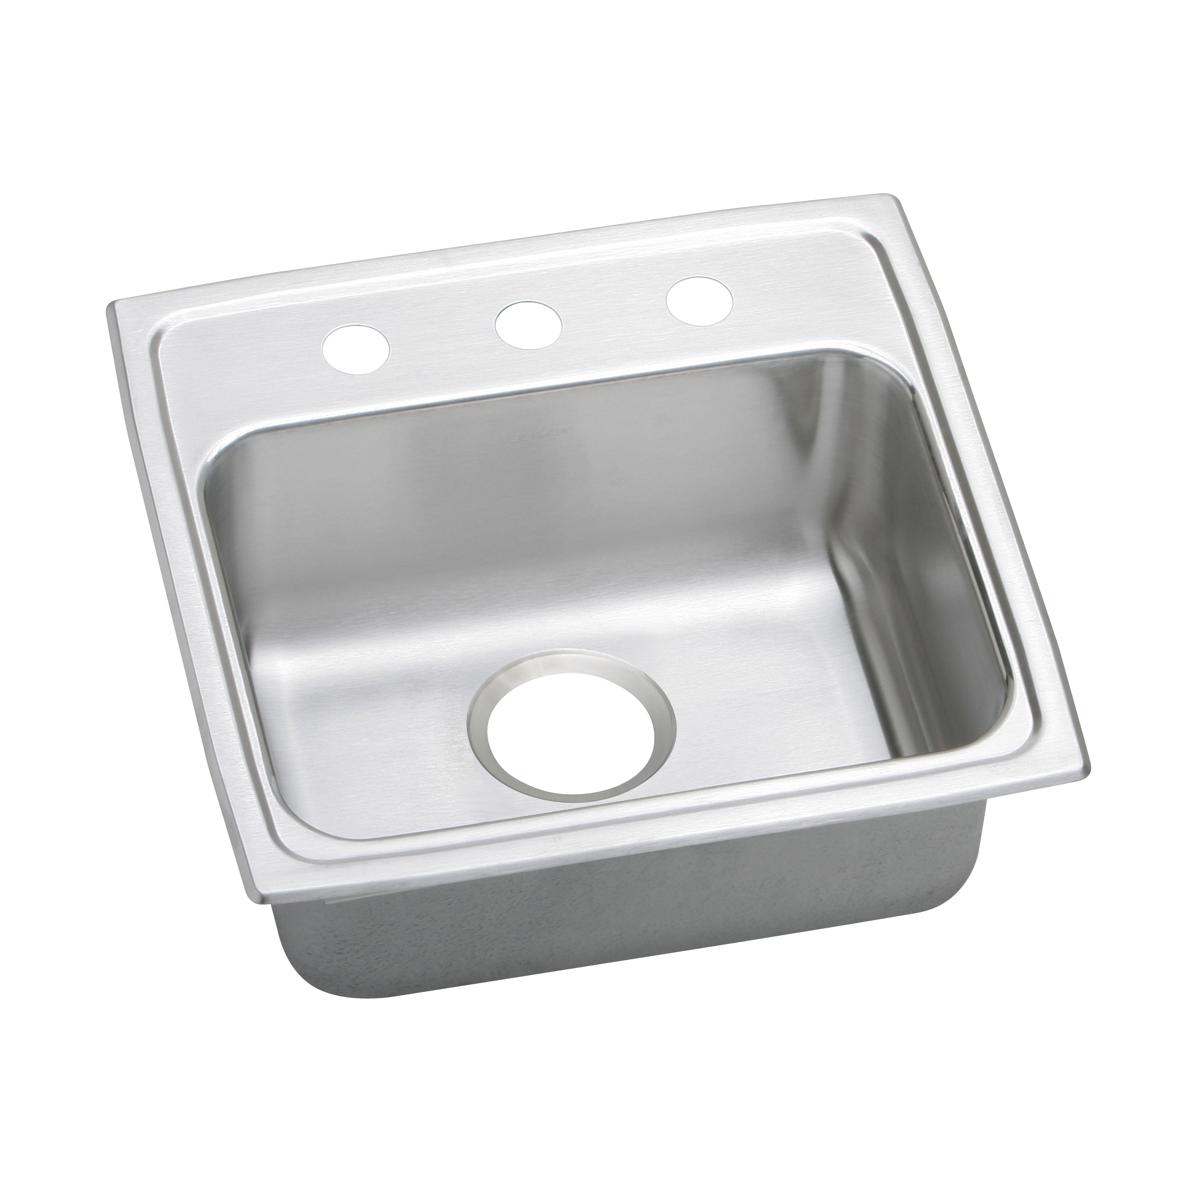 Elkay Lustertone Classic 19-1/2" x 19" x 6-1/2" MR2-Hole Single Bowl Drop-in ADA Sink with Quick-clip